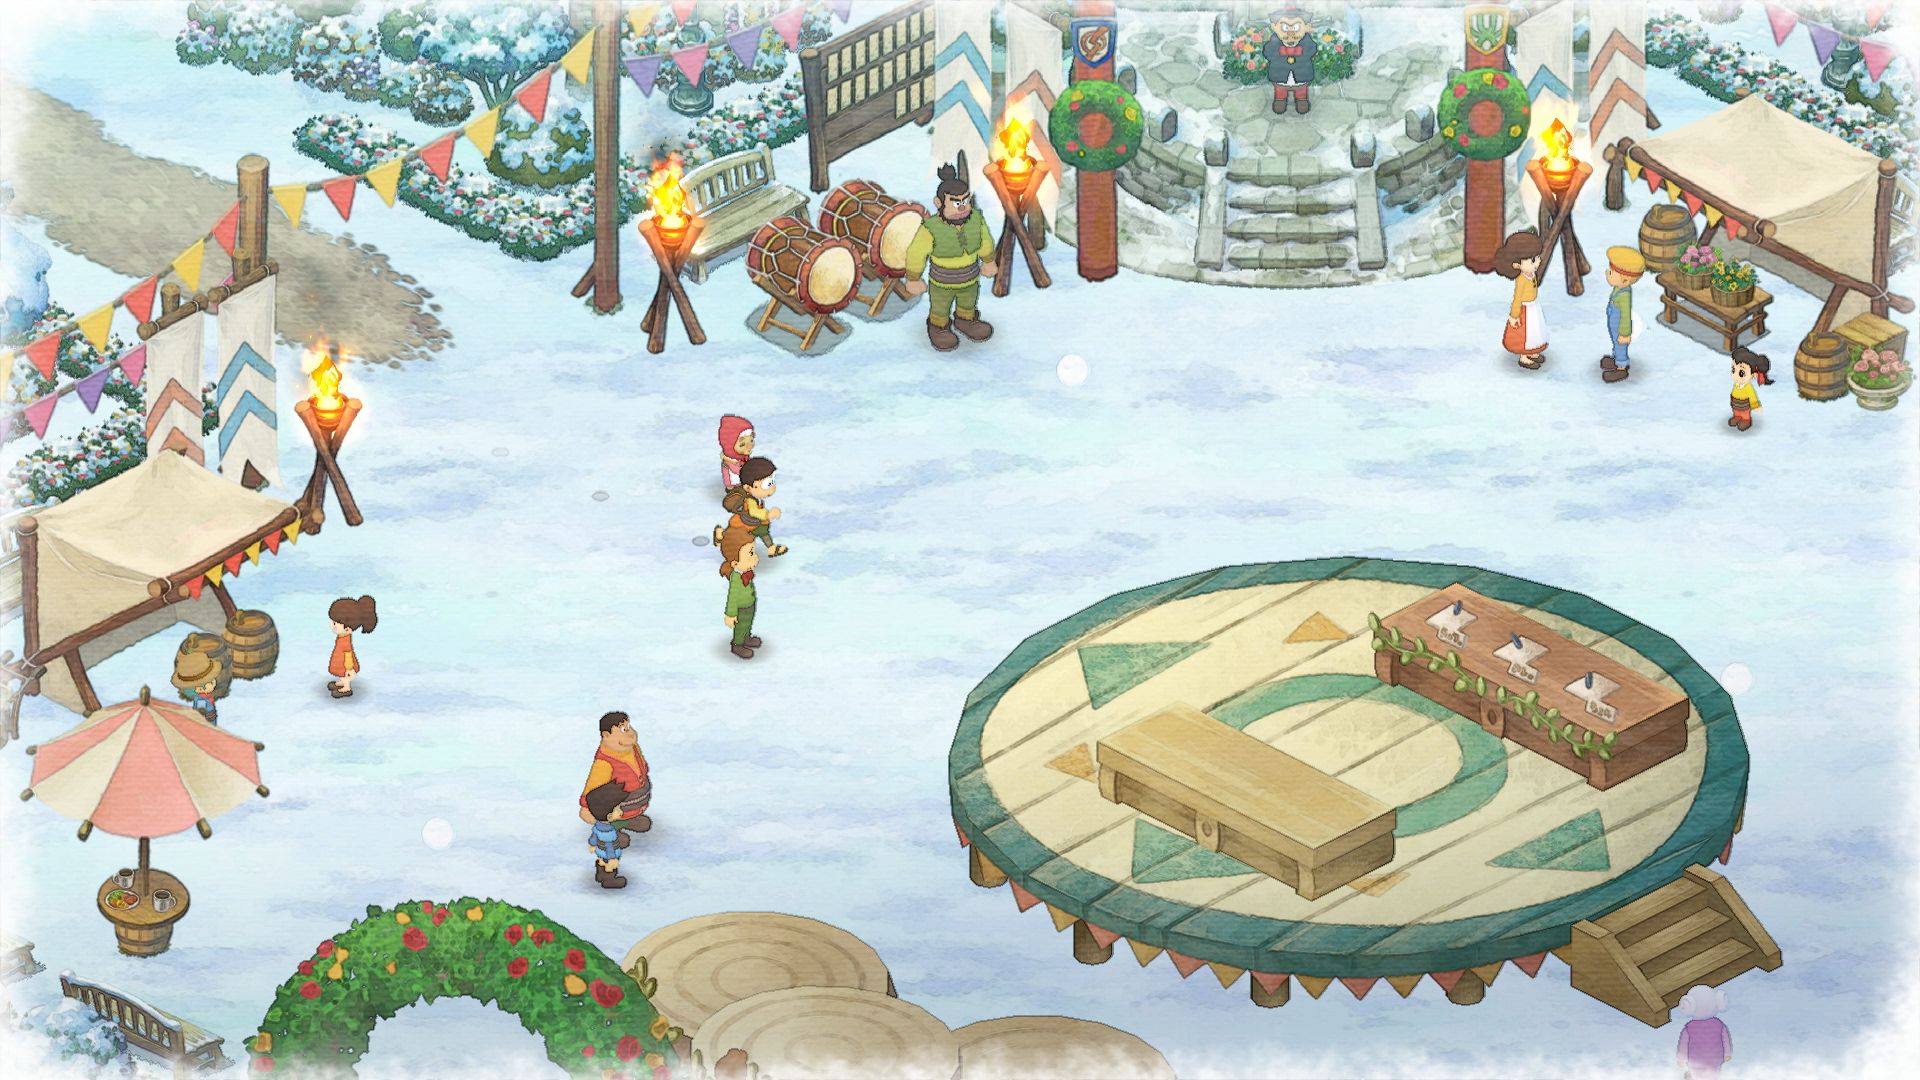 Doraemon Story of Seasons headed to Europe and North America this Fall